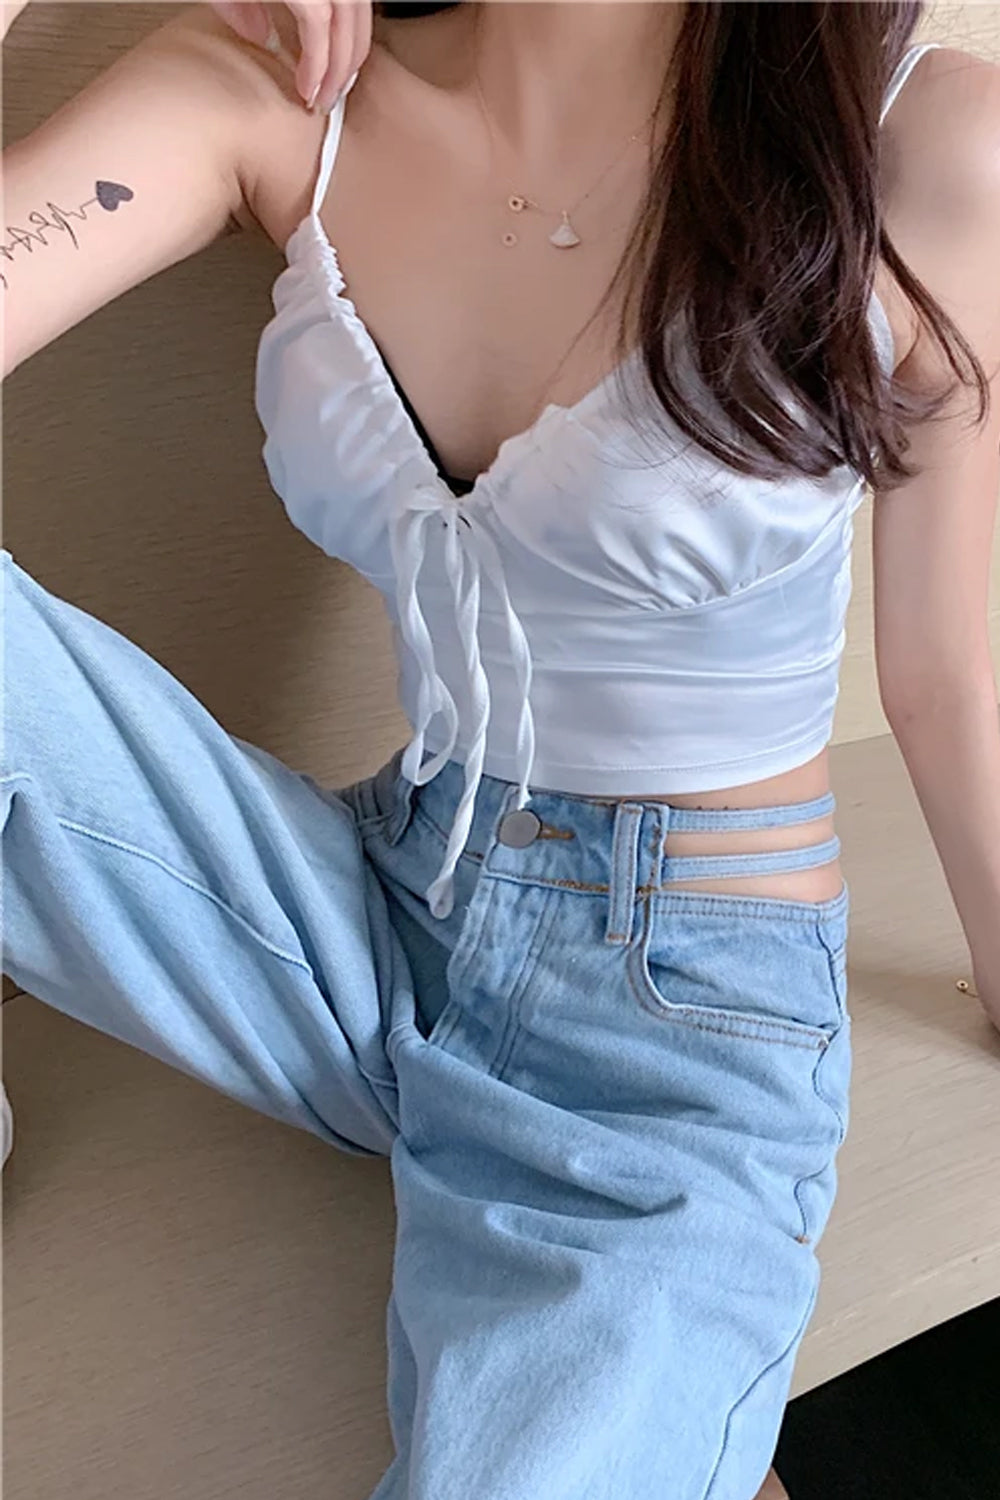 High Waist Side Hollow Out Jeans Pants